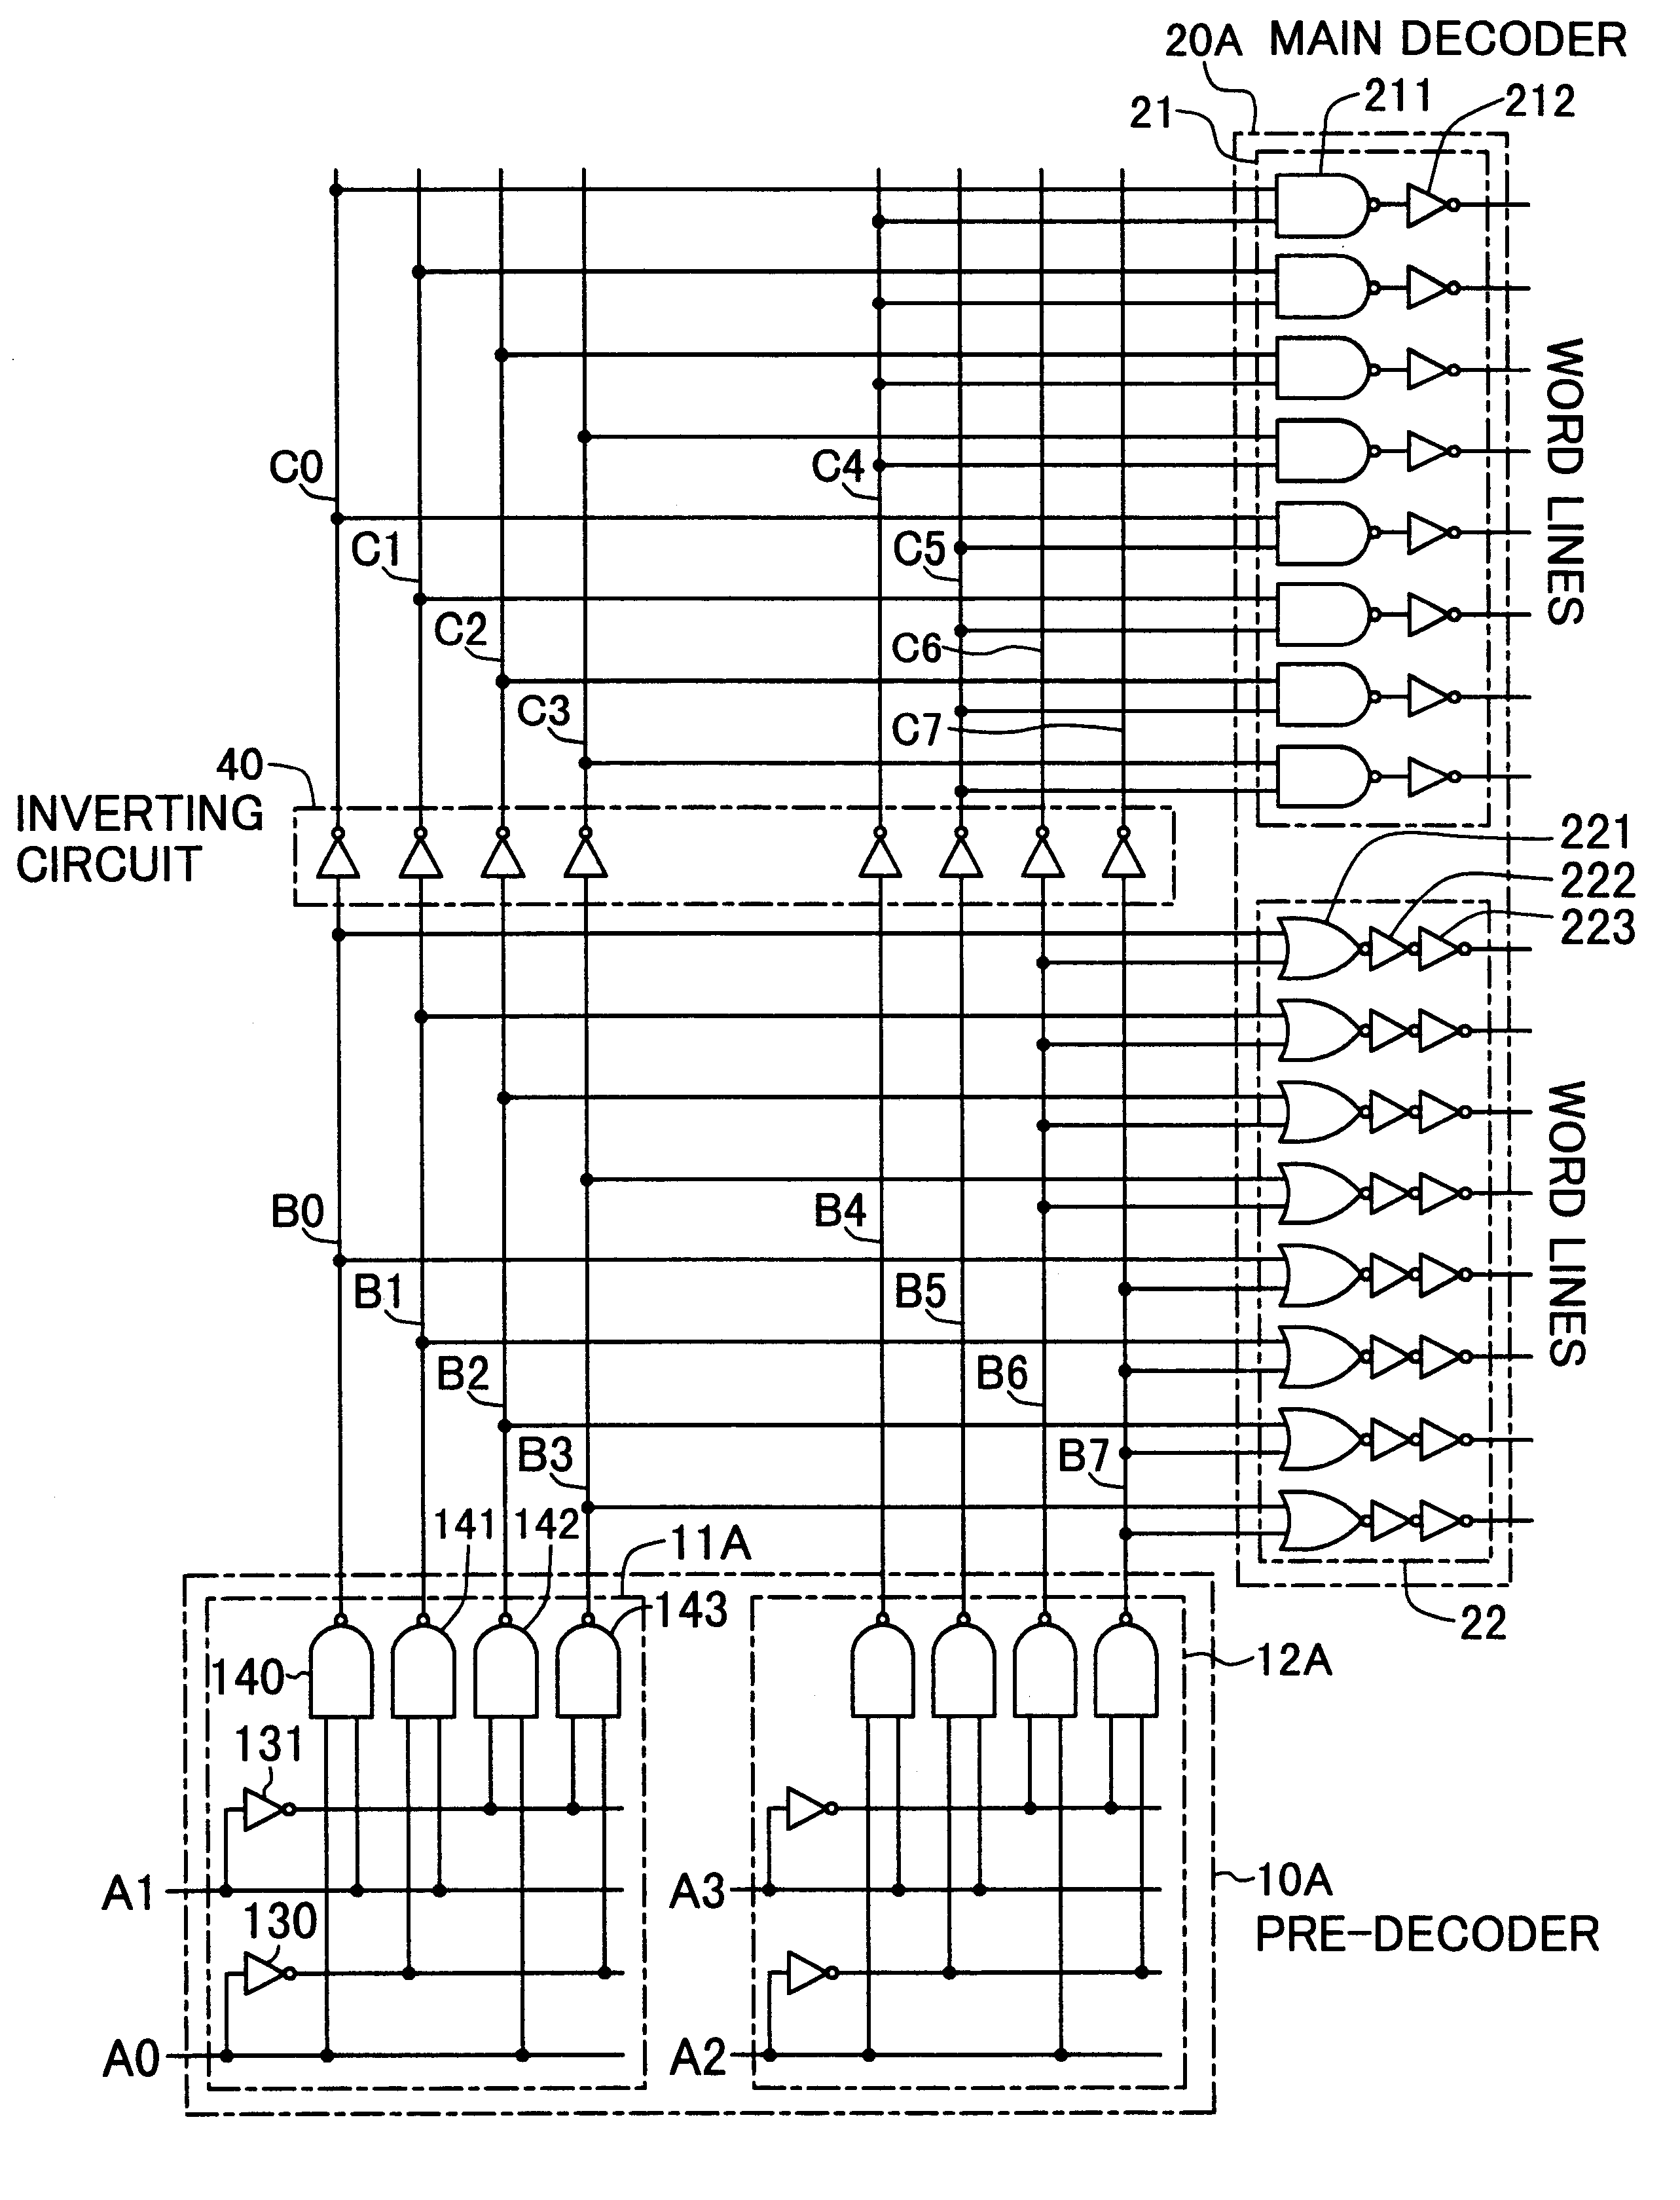 Semiconductor memory equipped with row address decoder having reduced signal propagation delay time